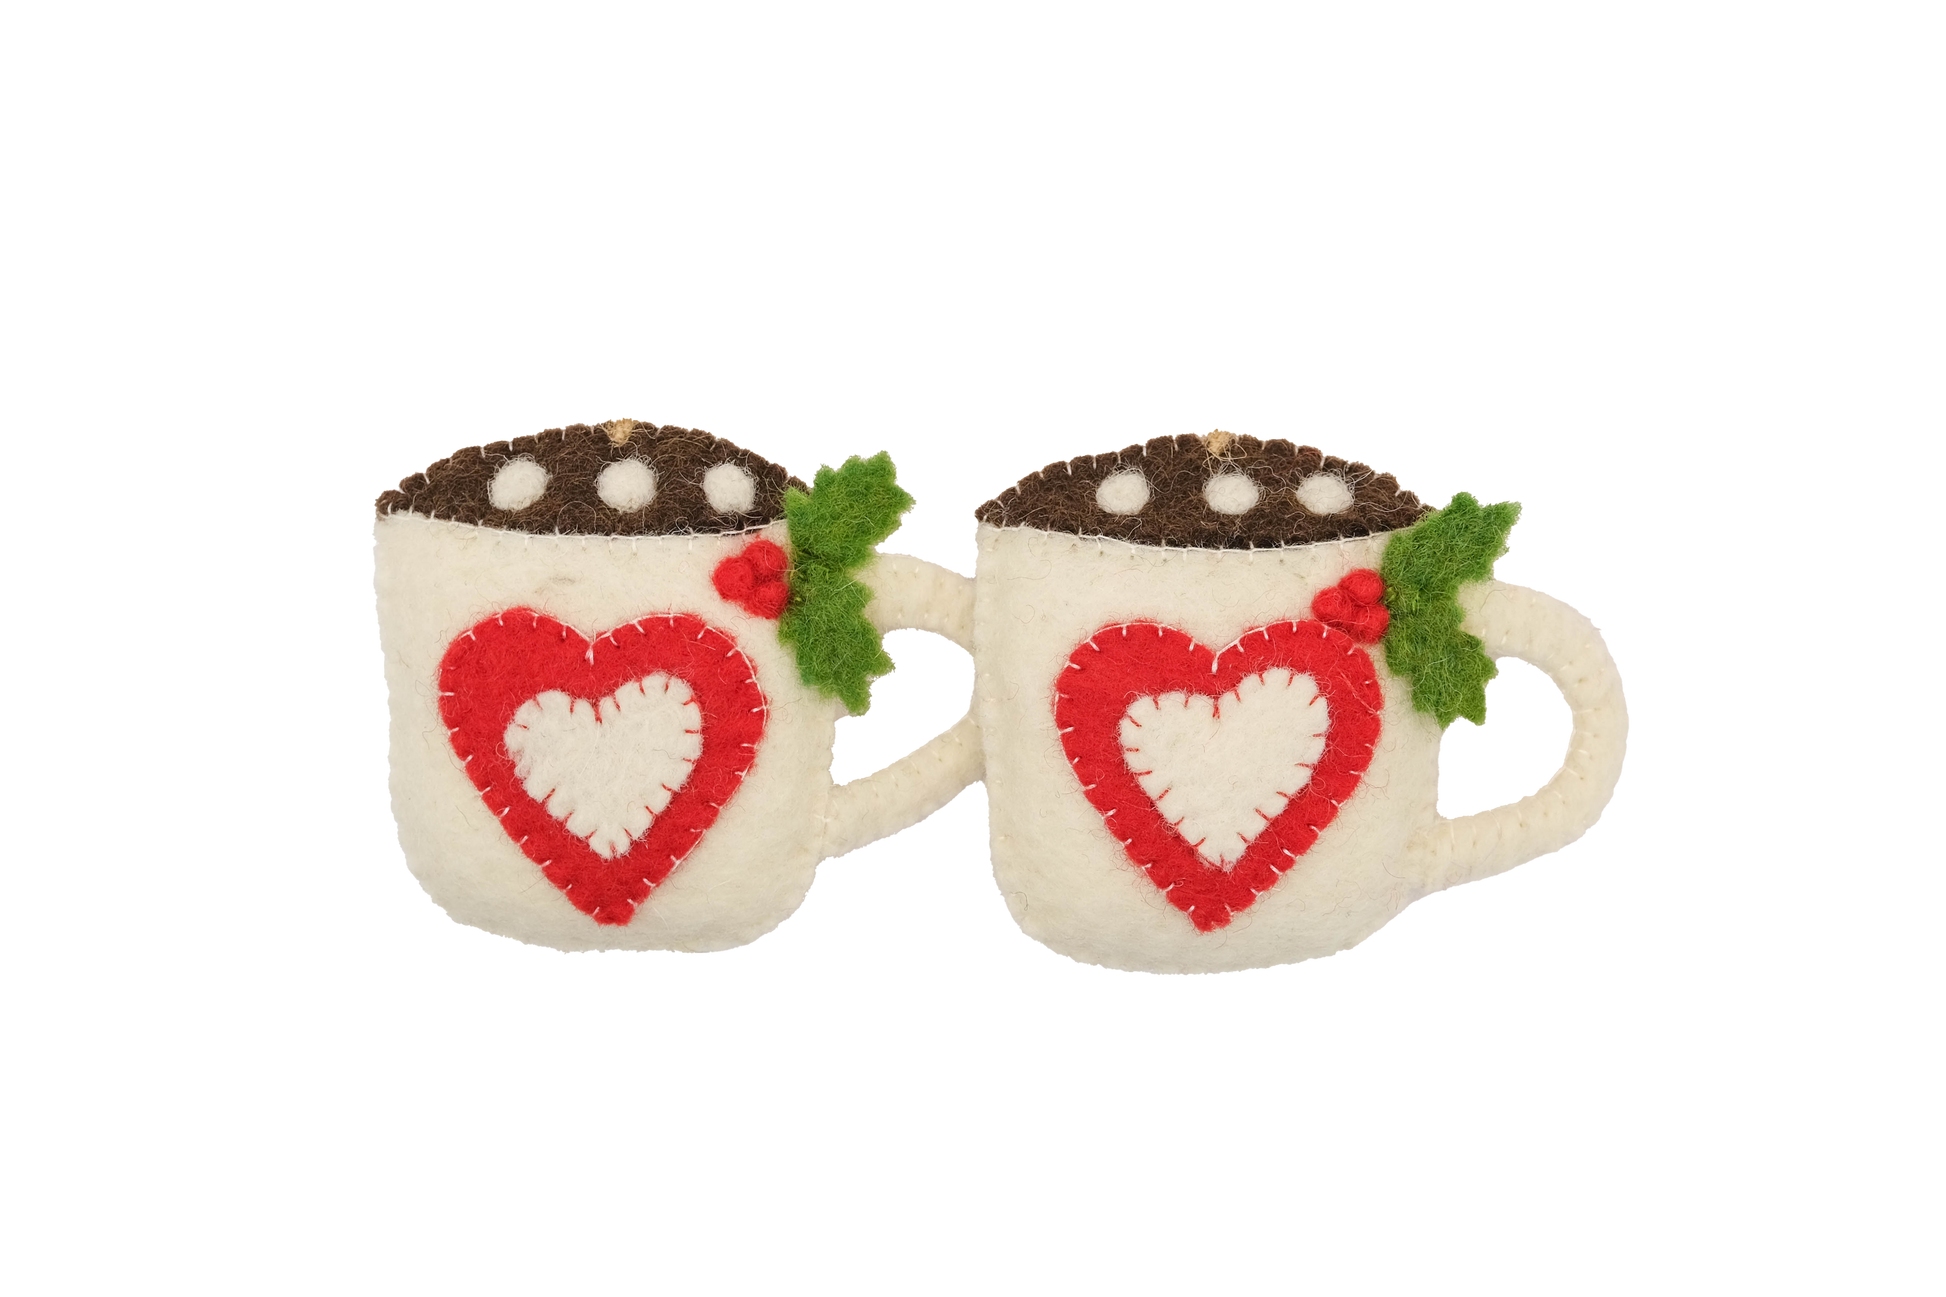 This Global Groove Life, handmade, ethical, fair trade, eco-friendly, sustainable, felt red and white hot cocoa and marshmallow with heart mug ornament set was created by artisans in Kathmandu Nepal and will bring colorful warmth and fun to your Christmas tree this season.